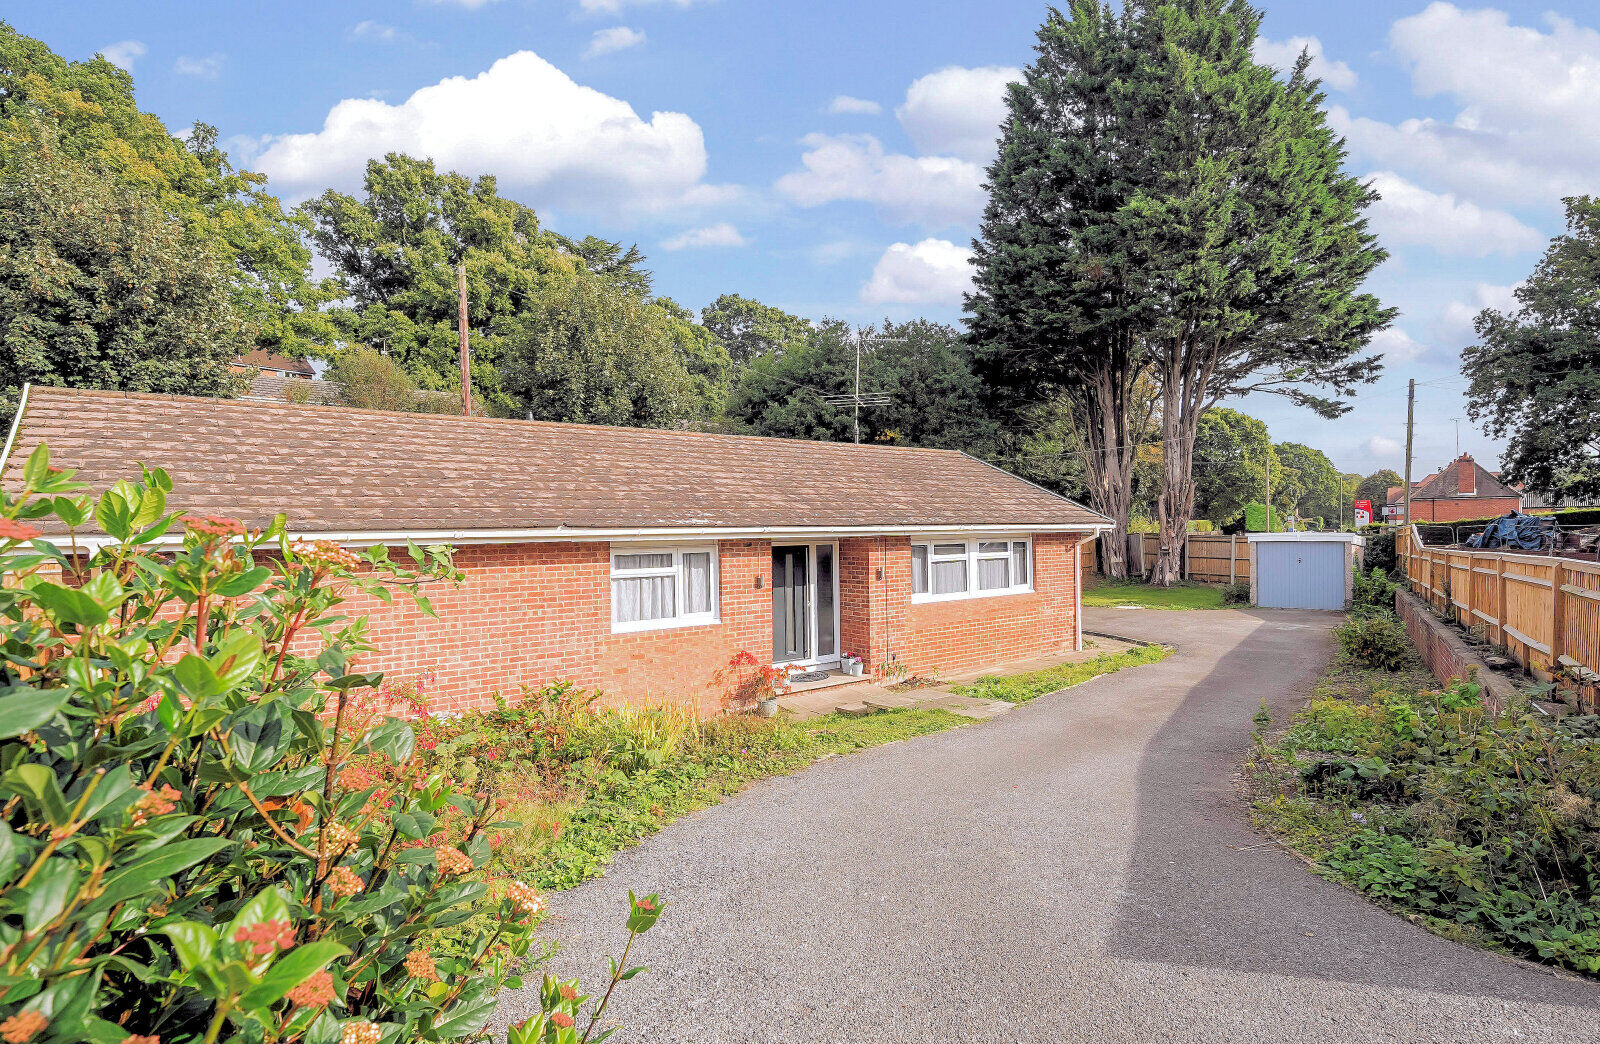 3 bedroom detached bungalow for sale Shiplake Bottom, Peppard Common, RG9, main image